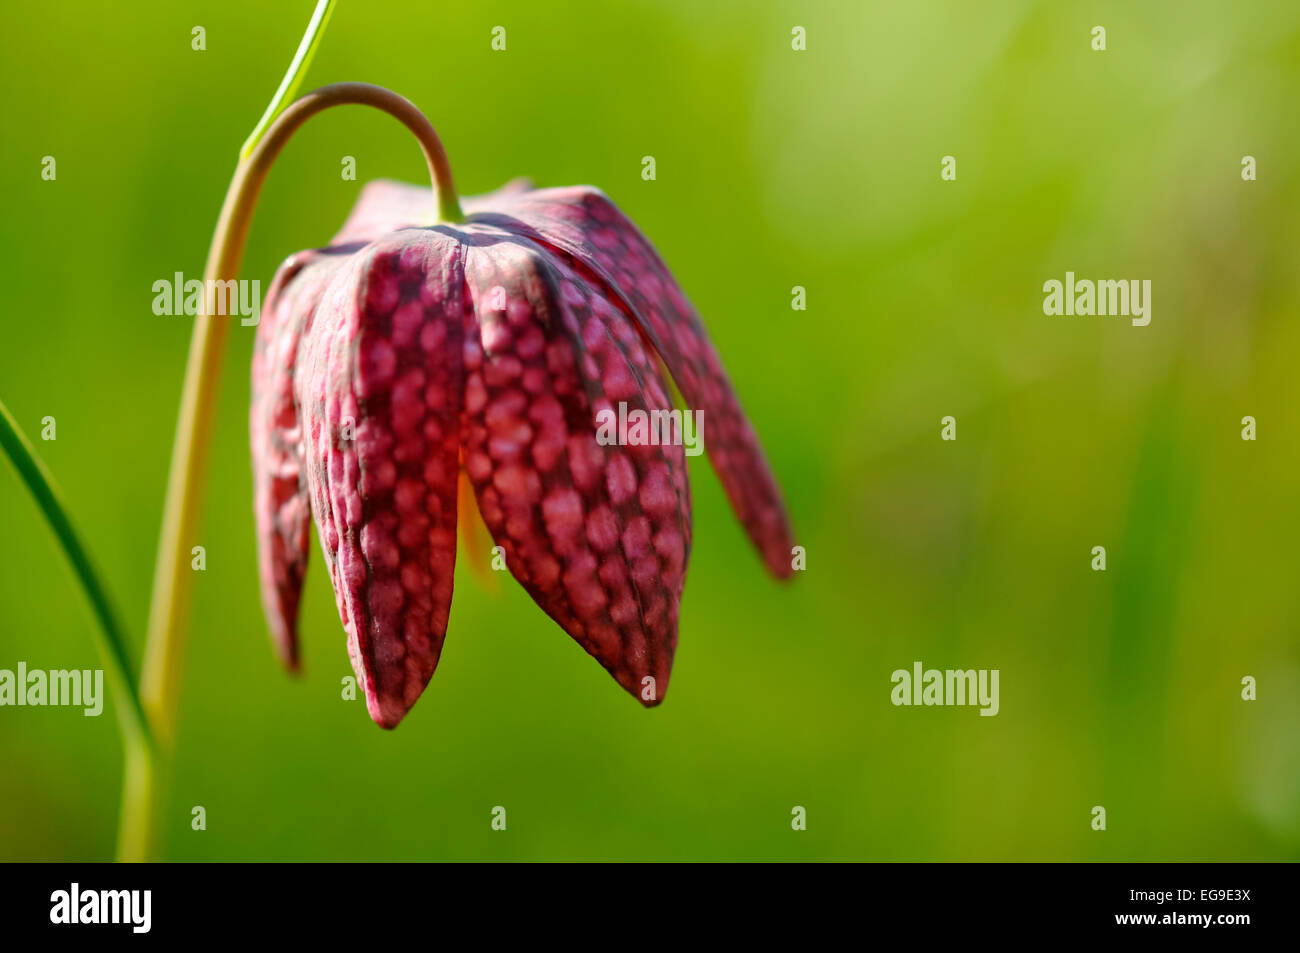 Snakes head Fritillary, Fritillaria Meleagris in close up with the distinctive checkerboard pattern on the red flower. Stock Photo